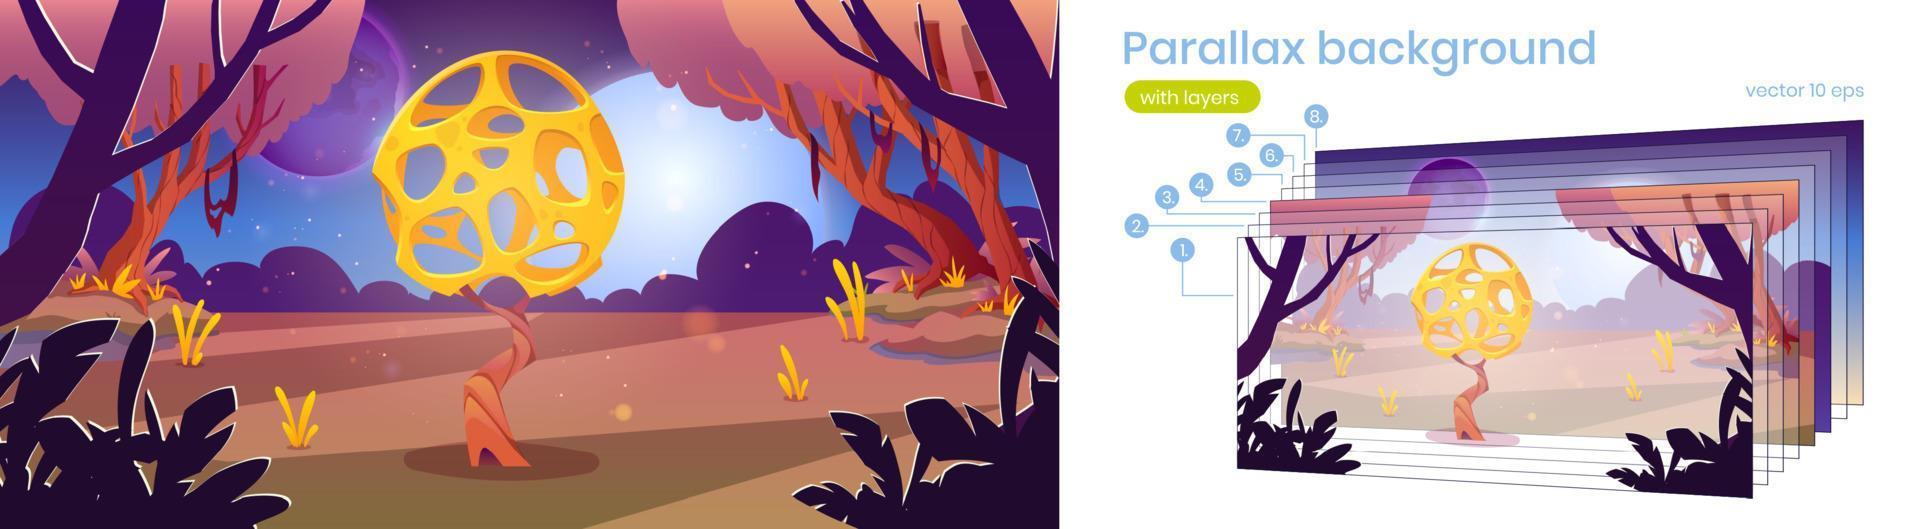 Parallax background with unusual yellow mushroom vector